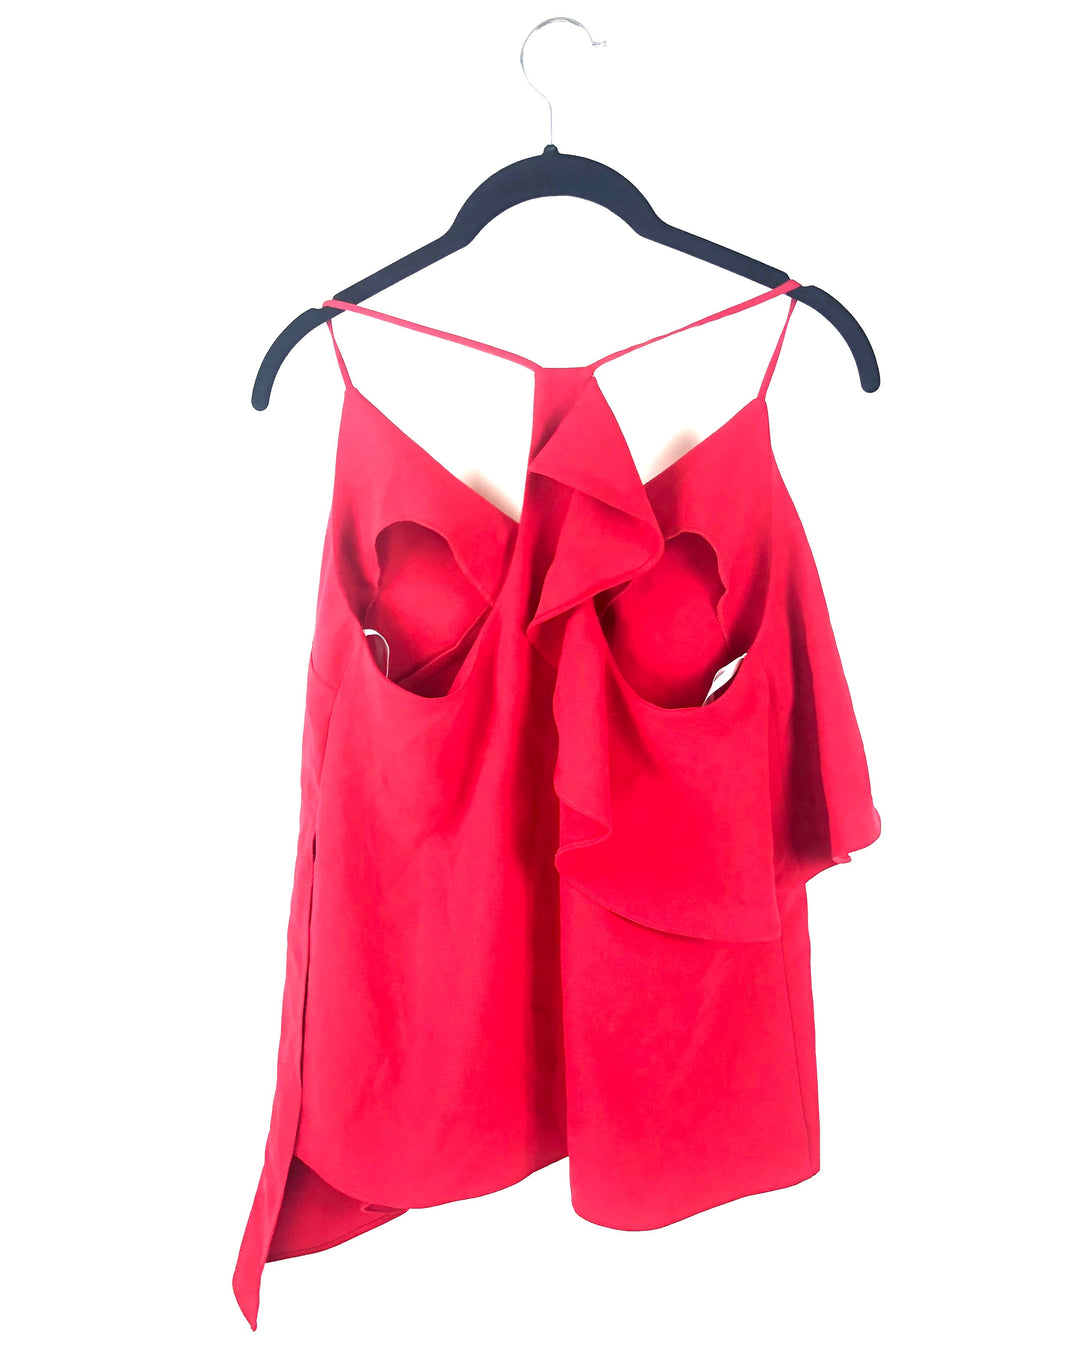 Red Ruffle Top - Small